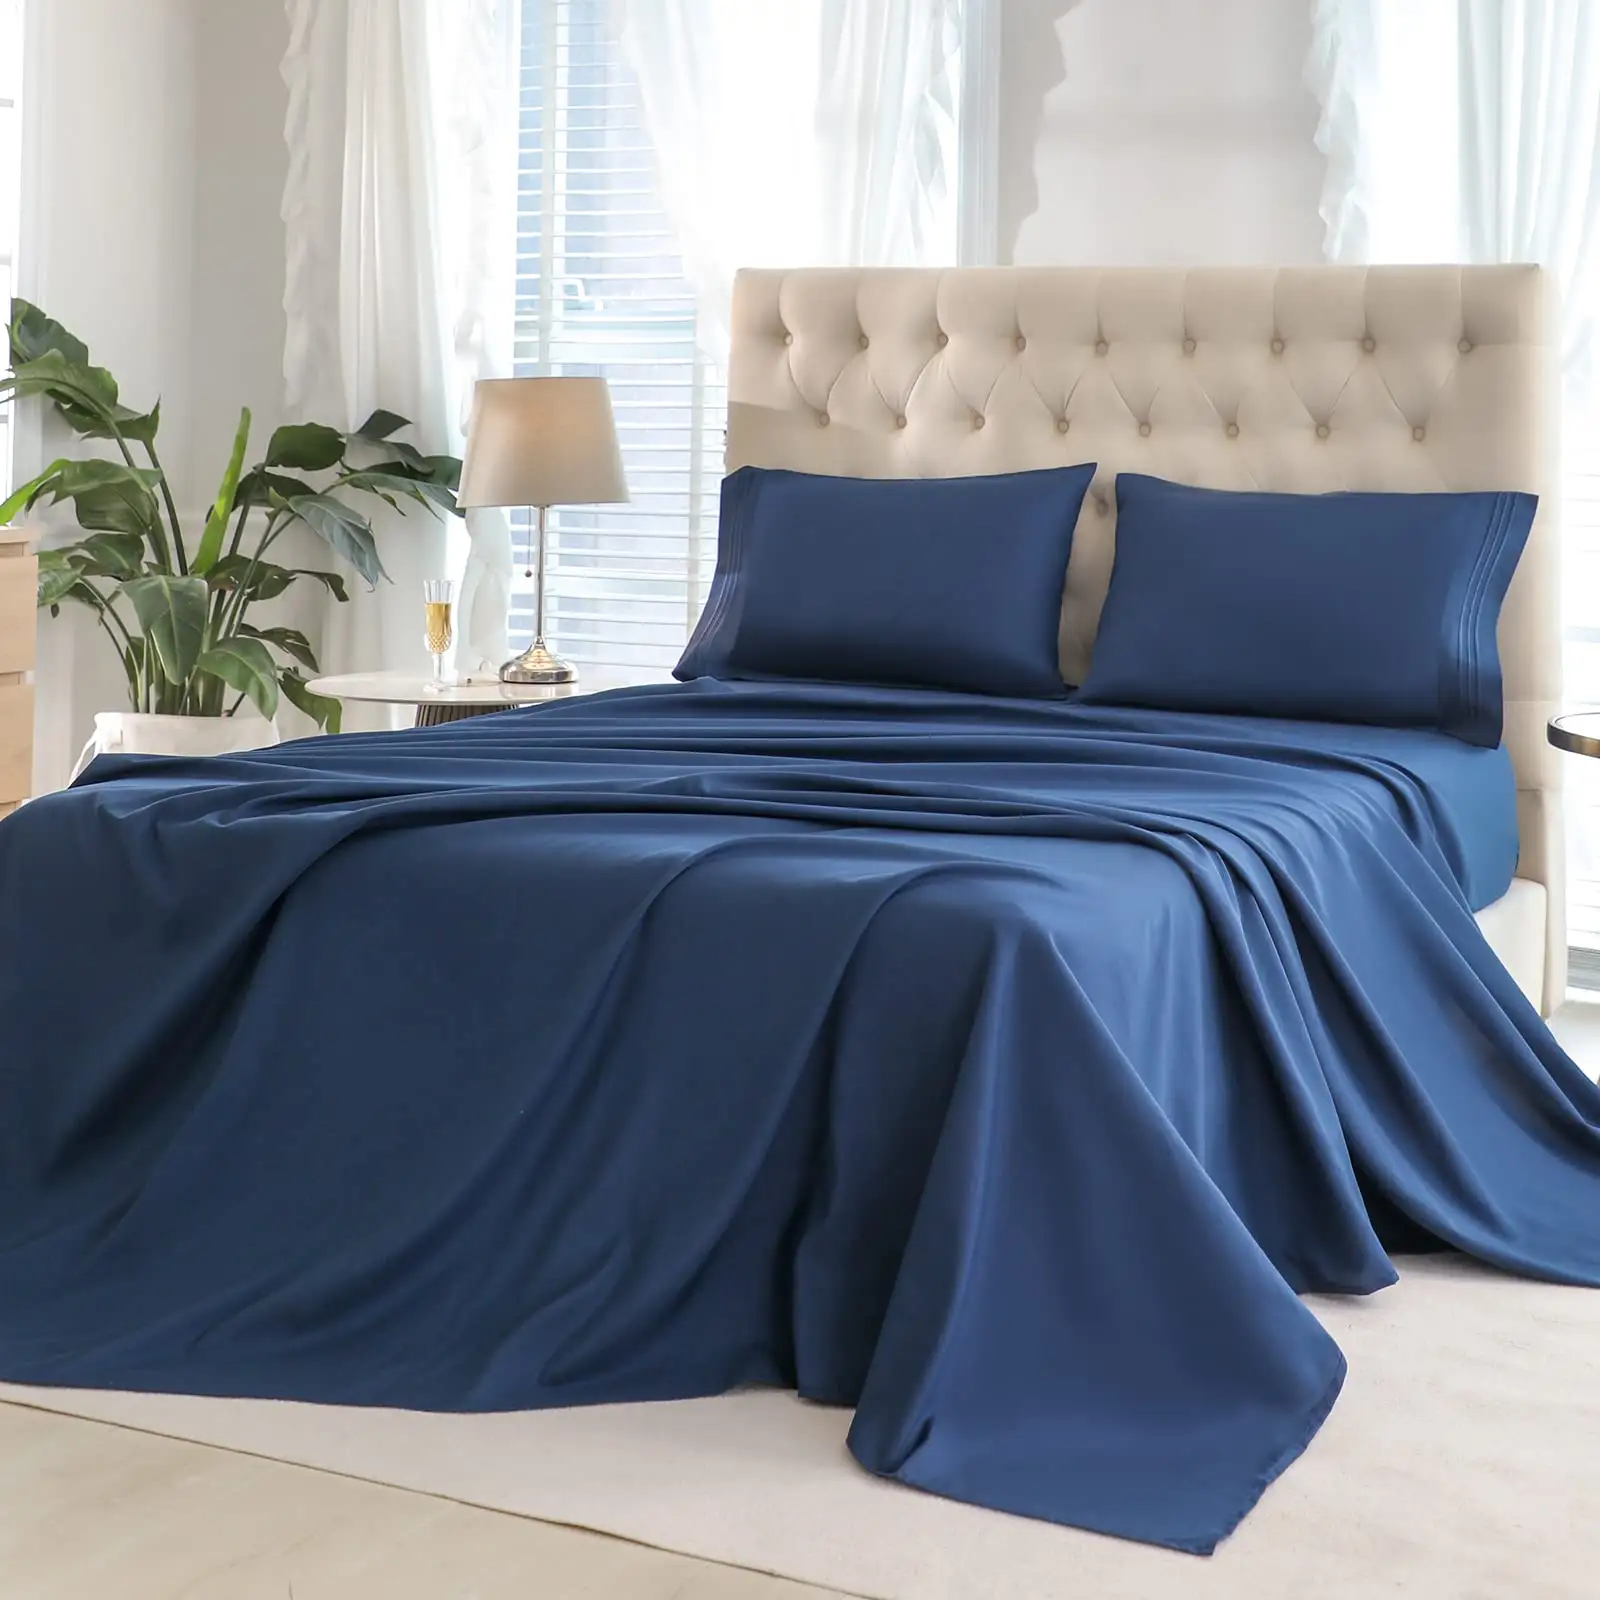 Amazon hot selling100% Cotton bed sheet set King Queen size with 2 pillow case 1 fitted 1flat